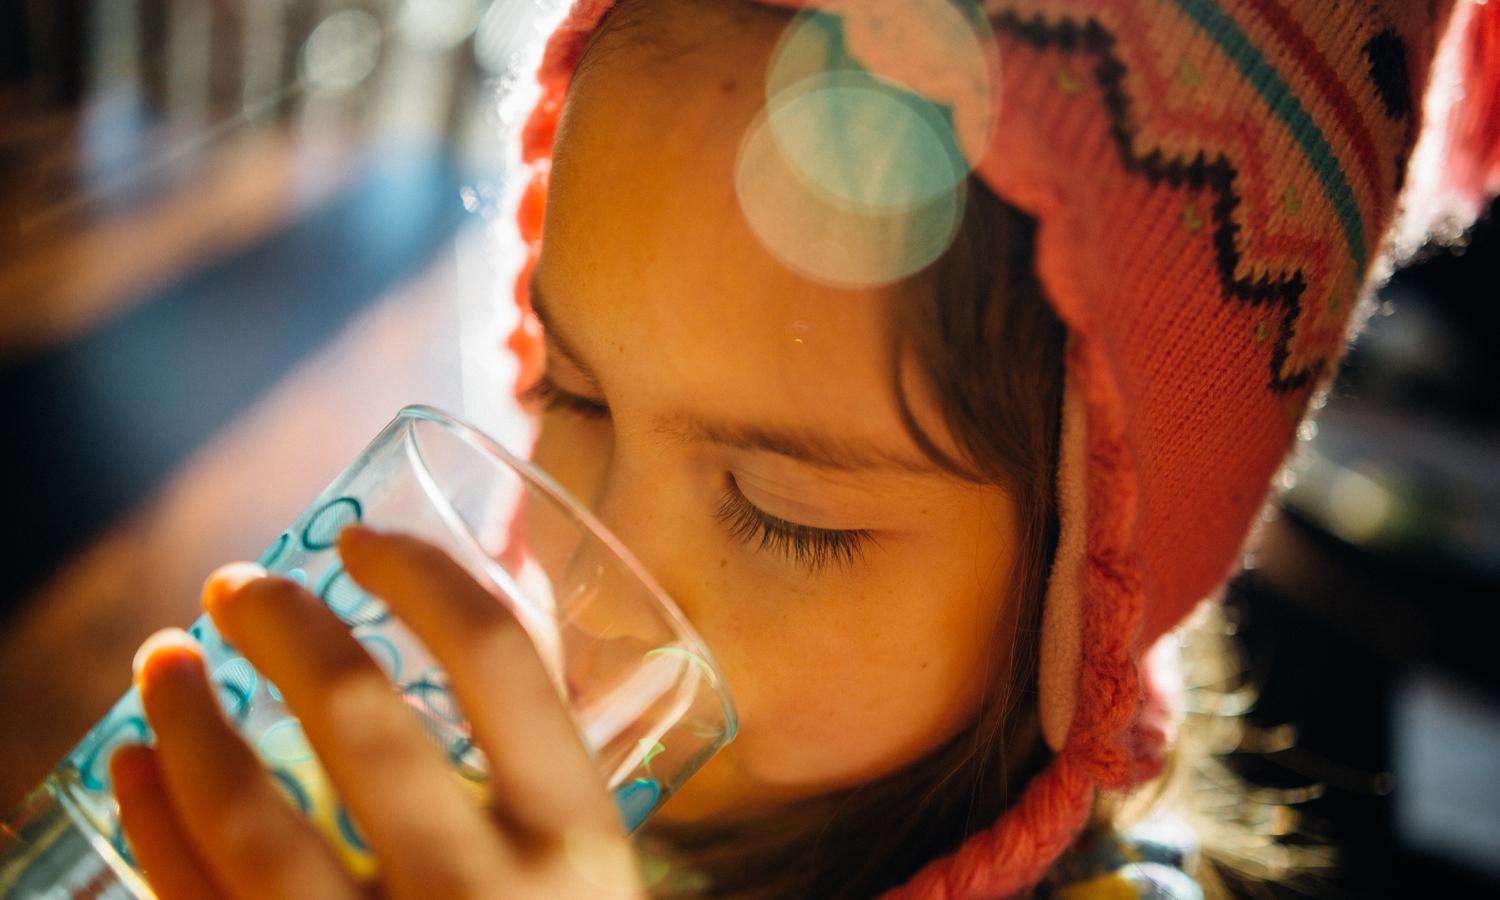 A kid drinks a glass of water.